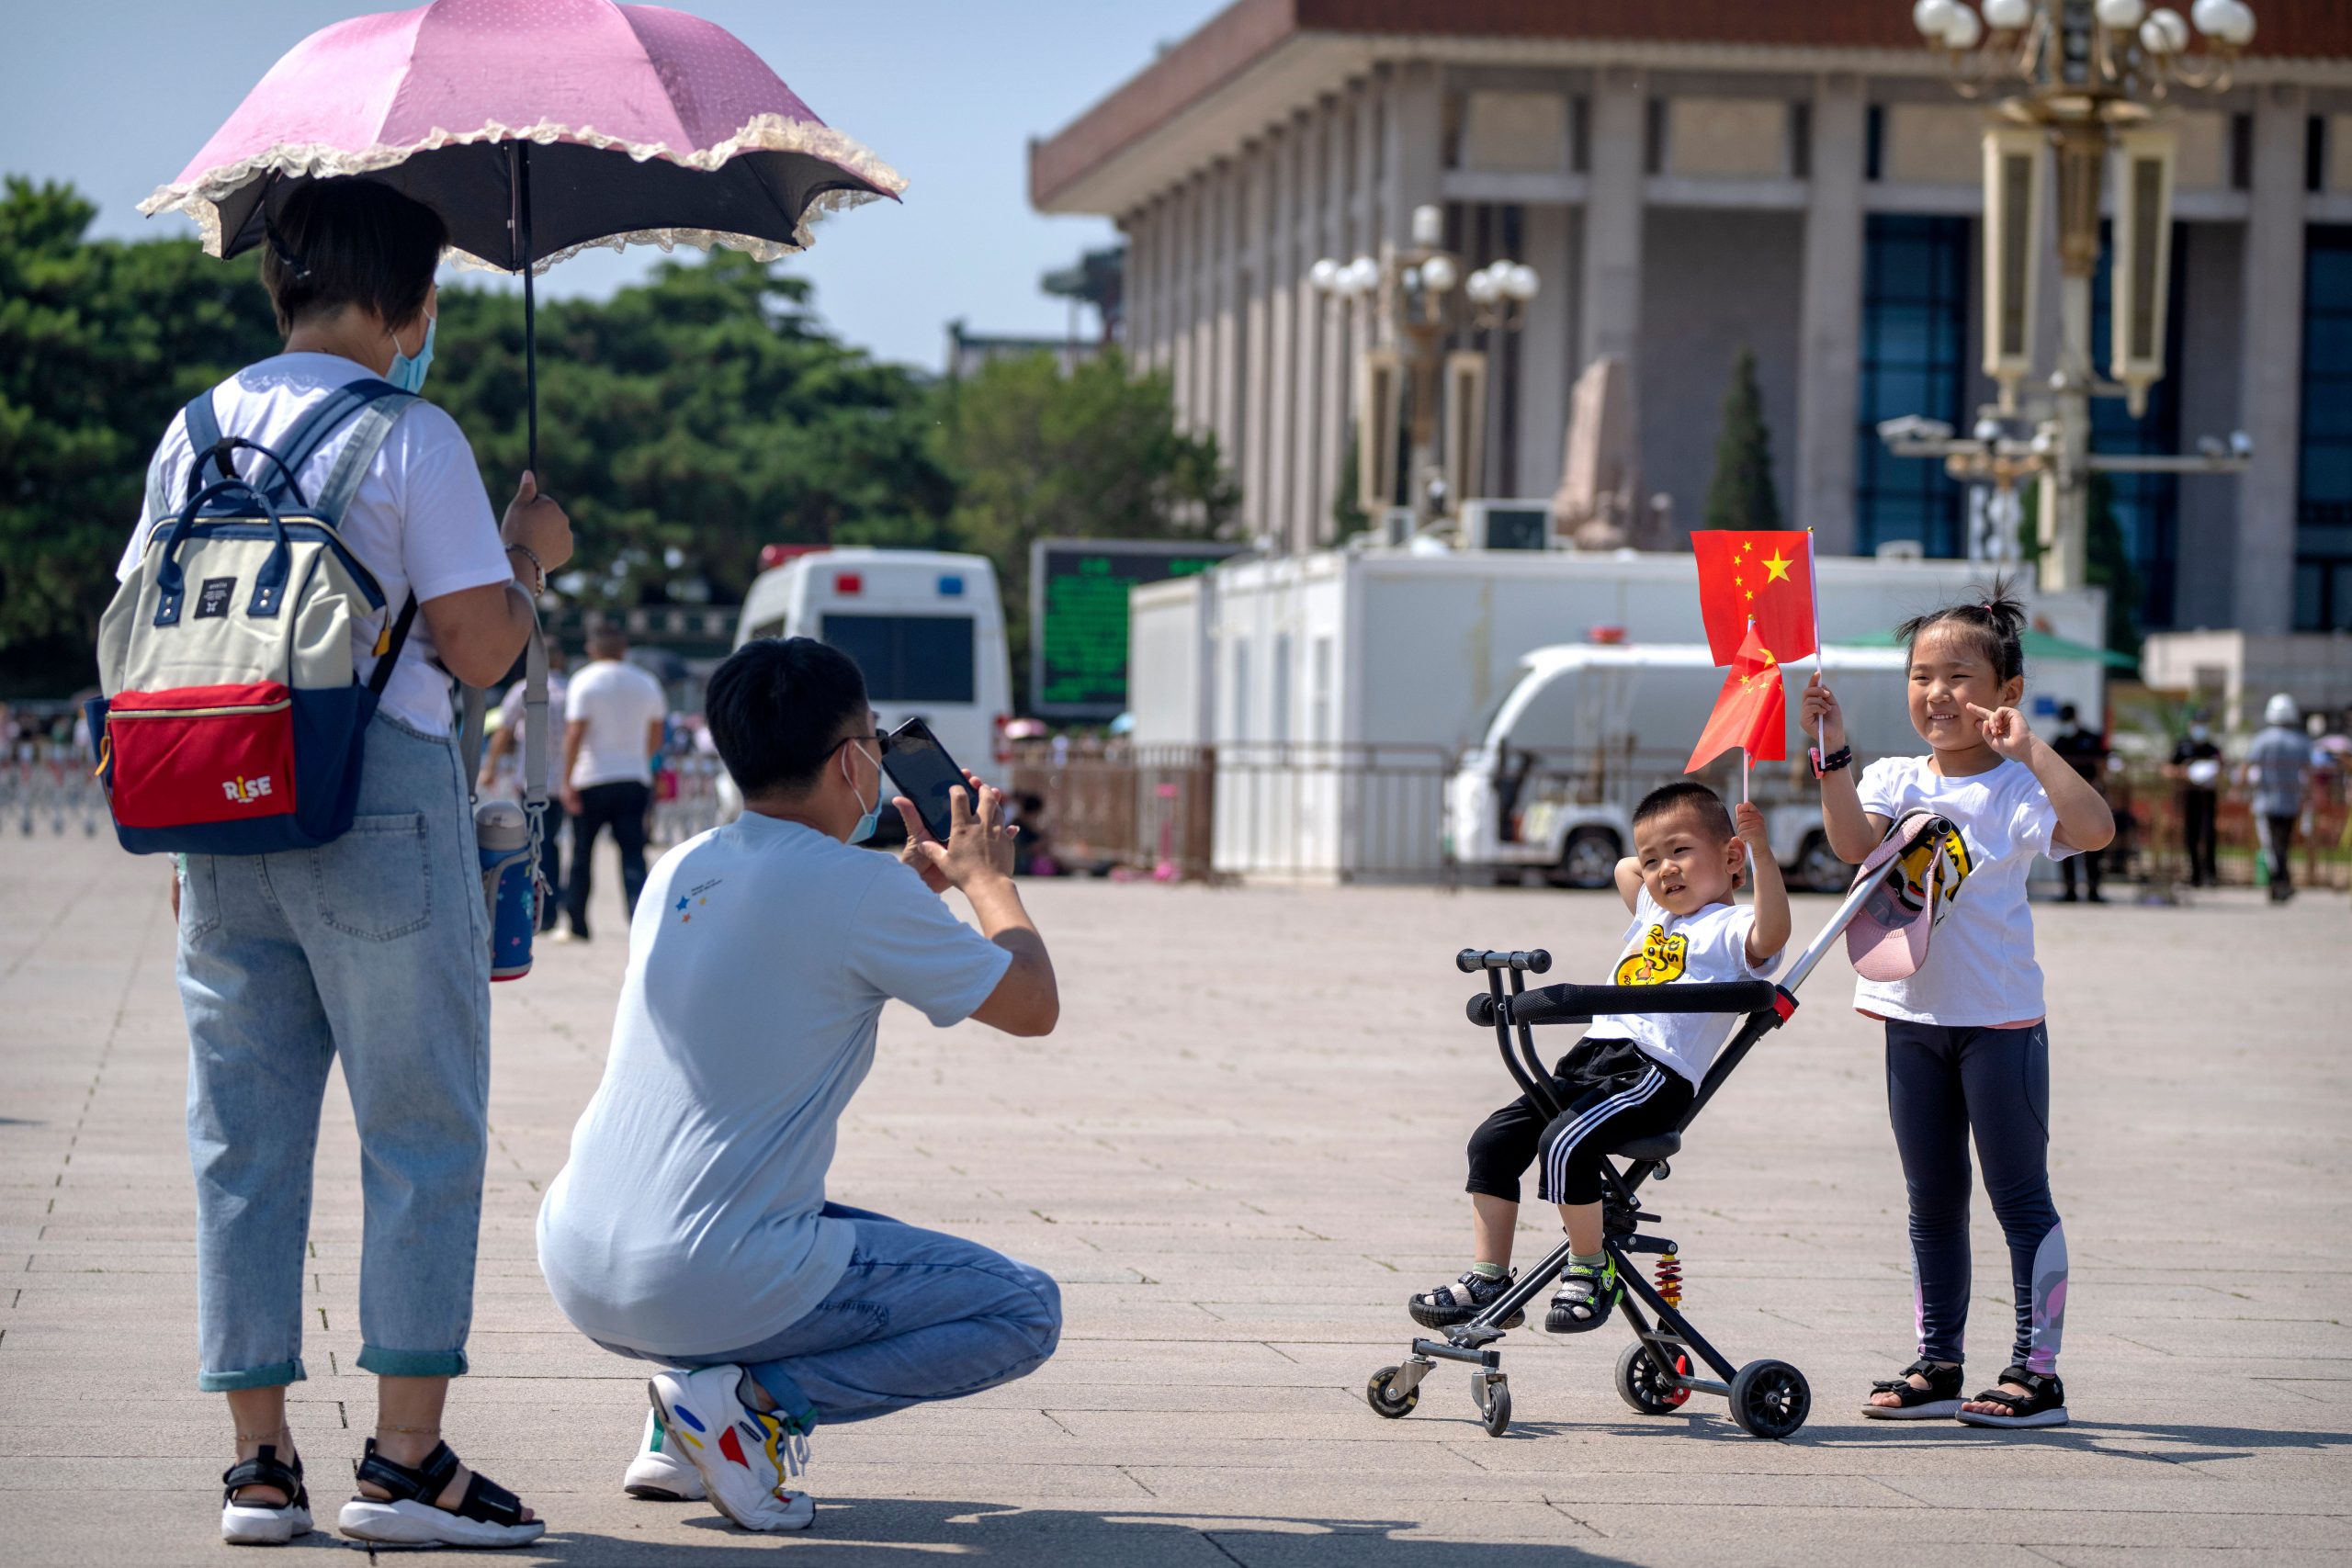 Explained: Why does China want couples to have three children?